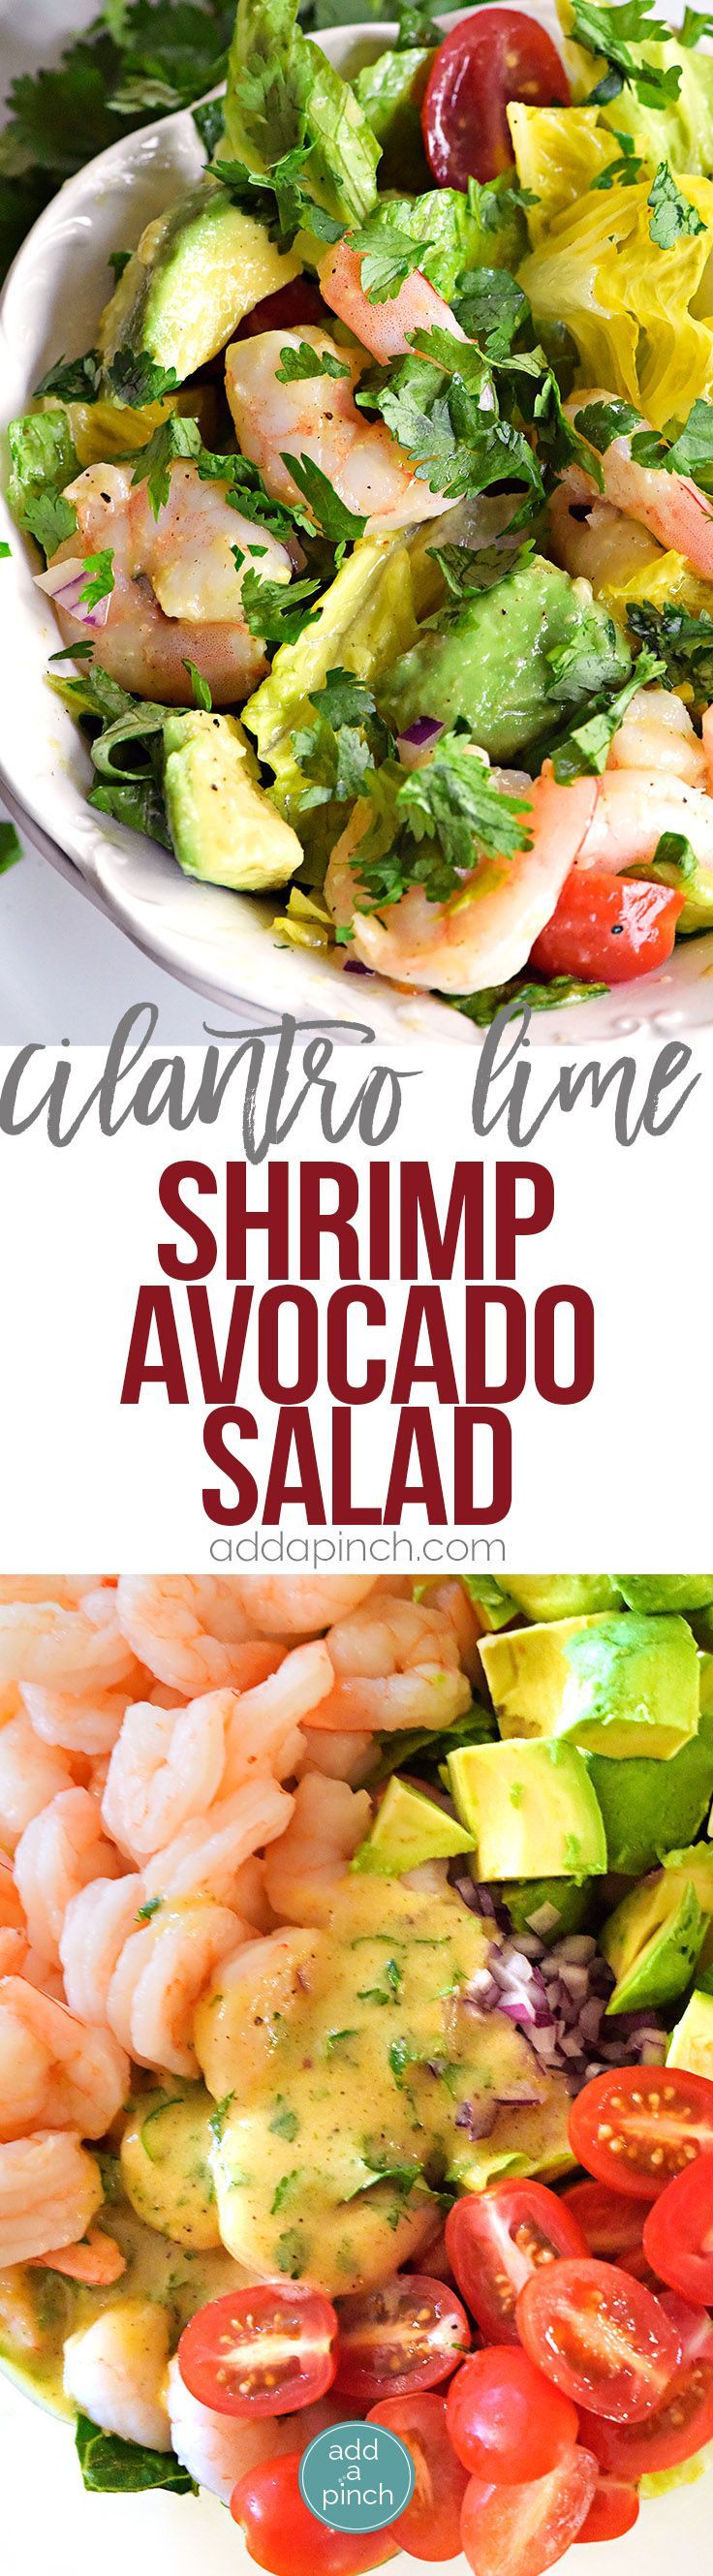 Cilantro Lime Shrimp Avocado Salad Recipe – This Cilantro Lime Shrimp Avocado Salad recipe has all the flavors of summer in every